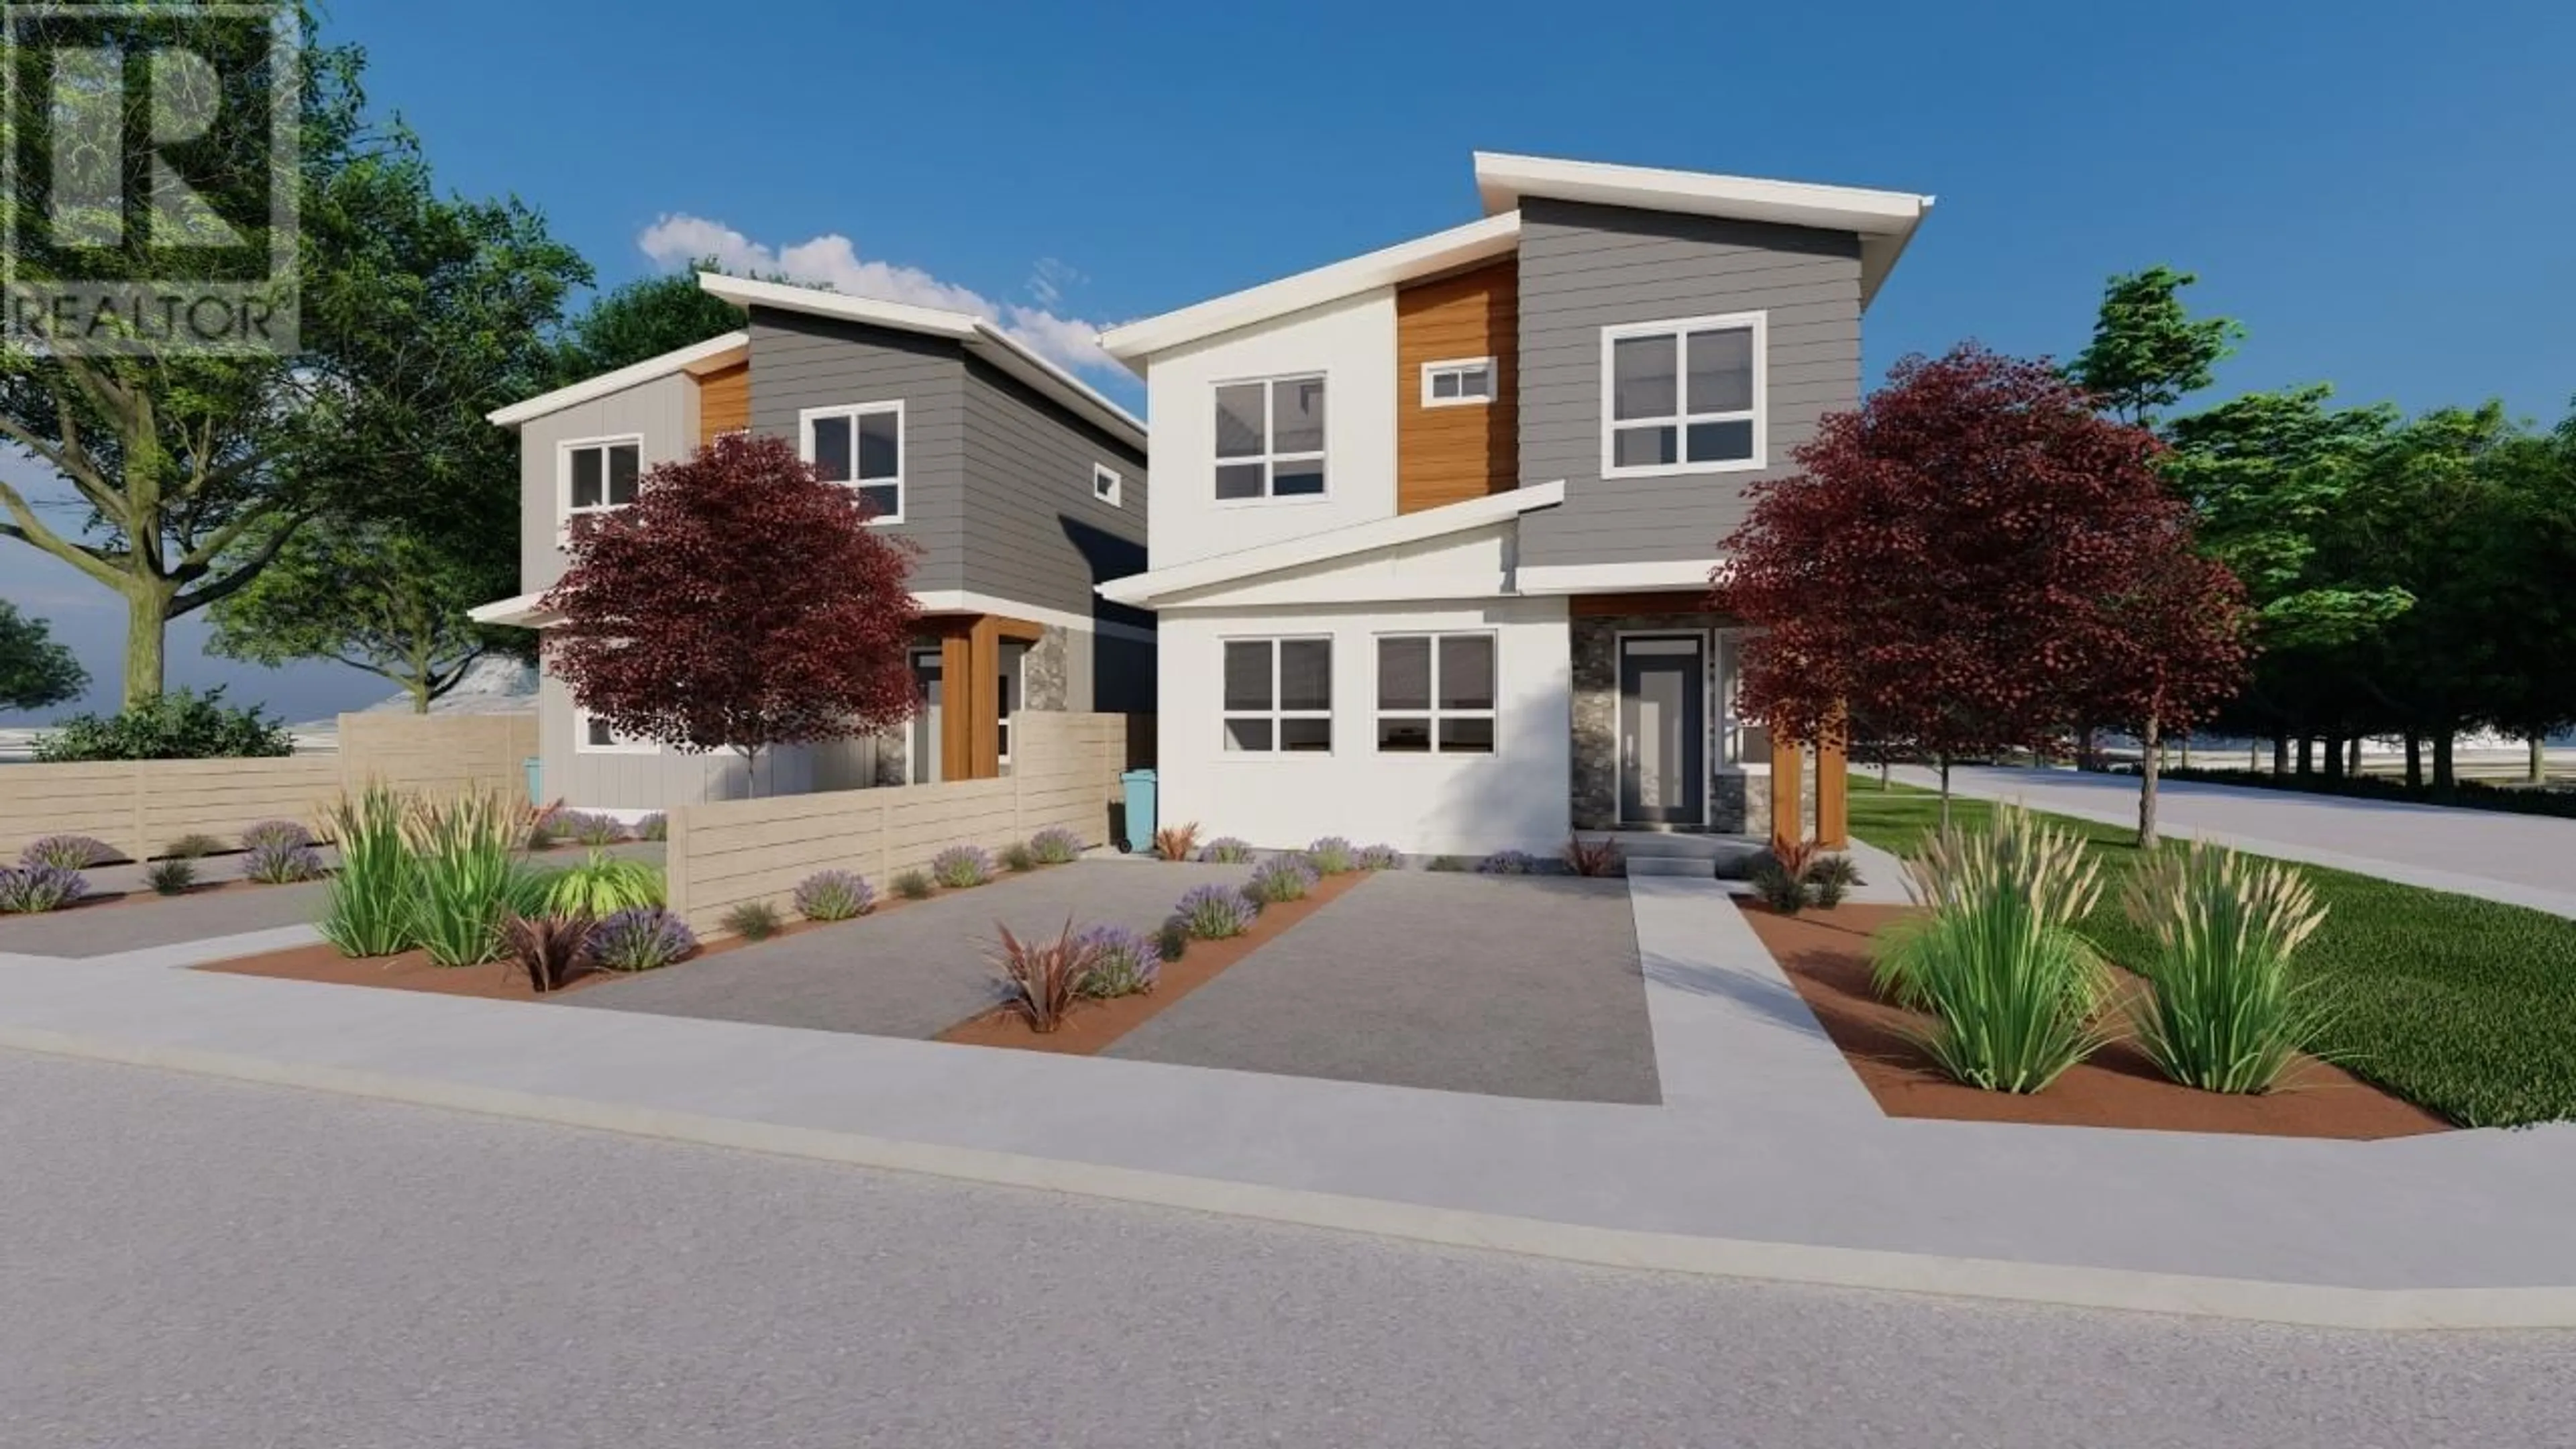 Frontside or backside of a home for 1701 FAIRFORD Drive Unit# 101, Penticton British Columbia v2A6C7